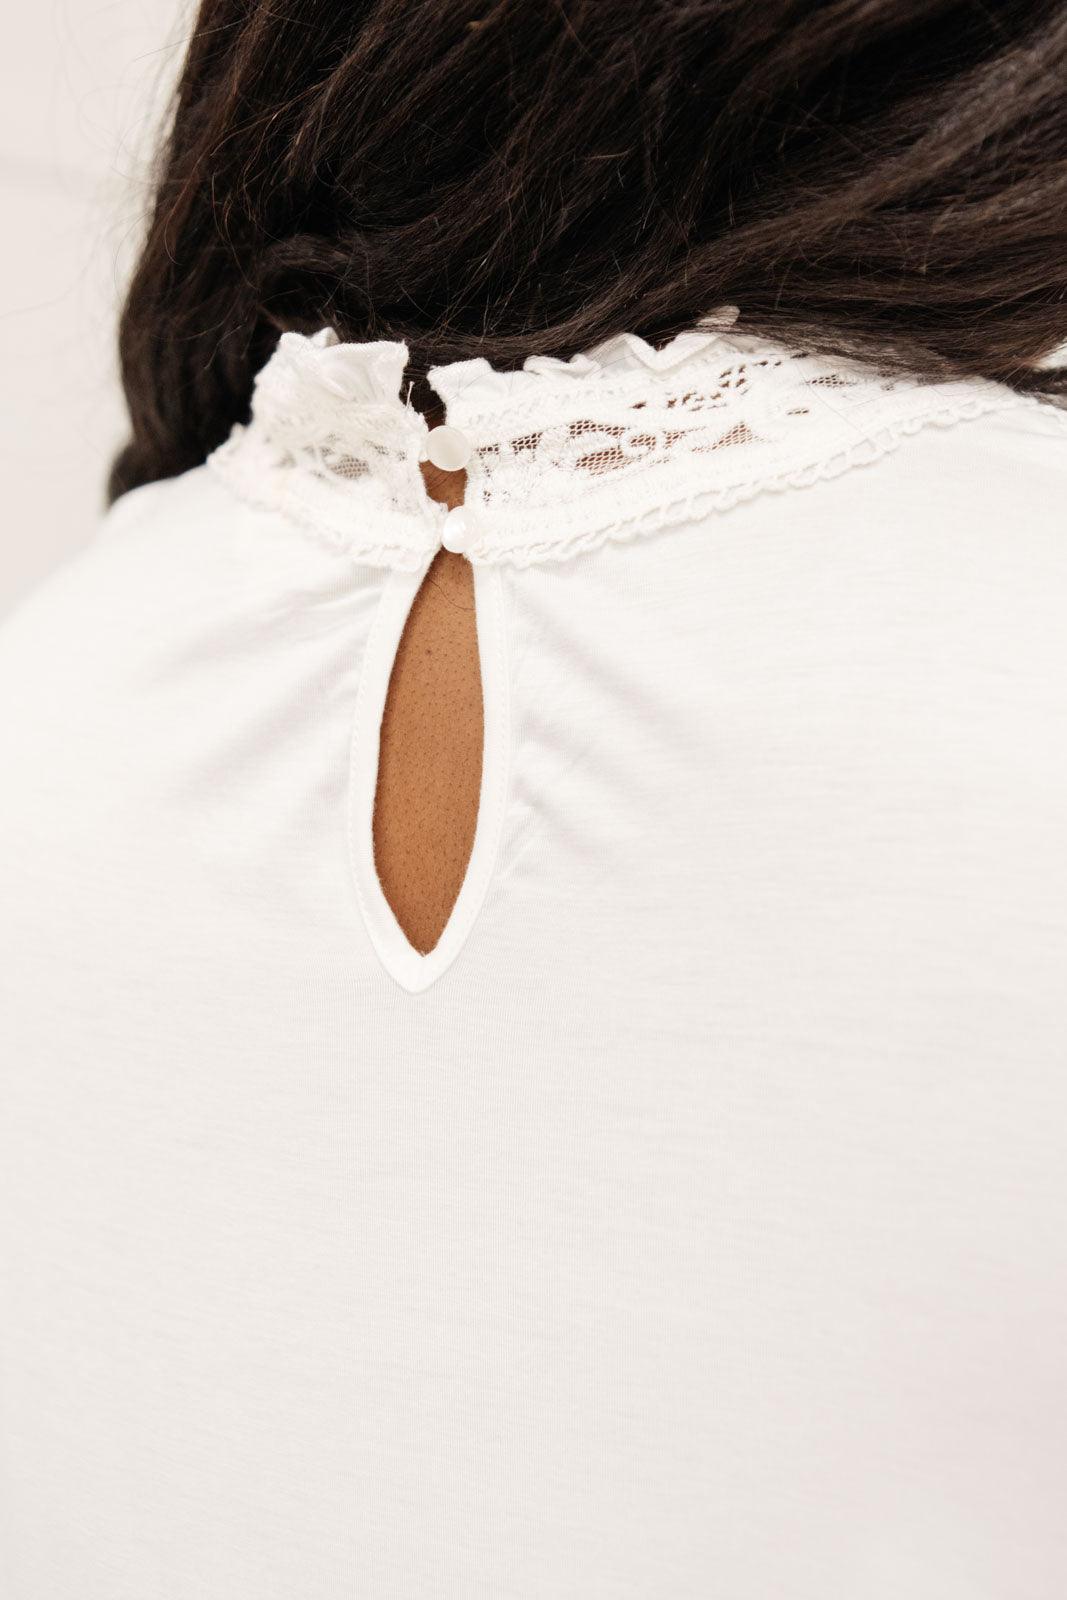 Picture This Top In Off White - The Fiery Jasmine